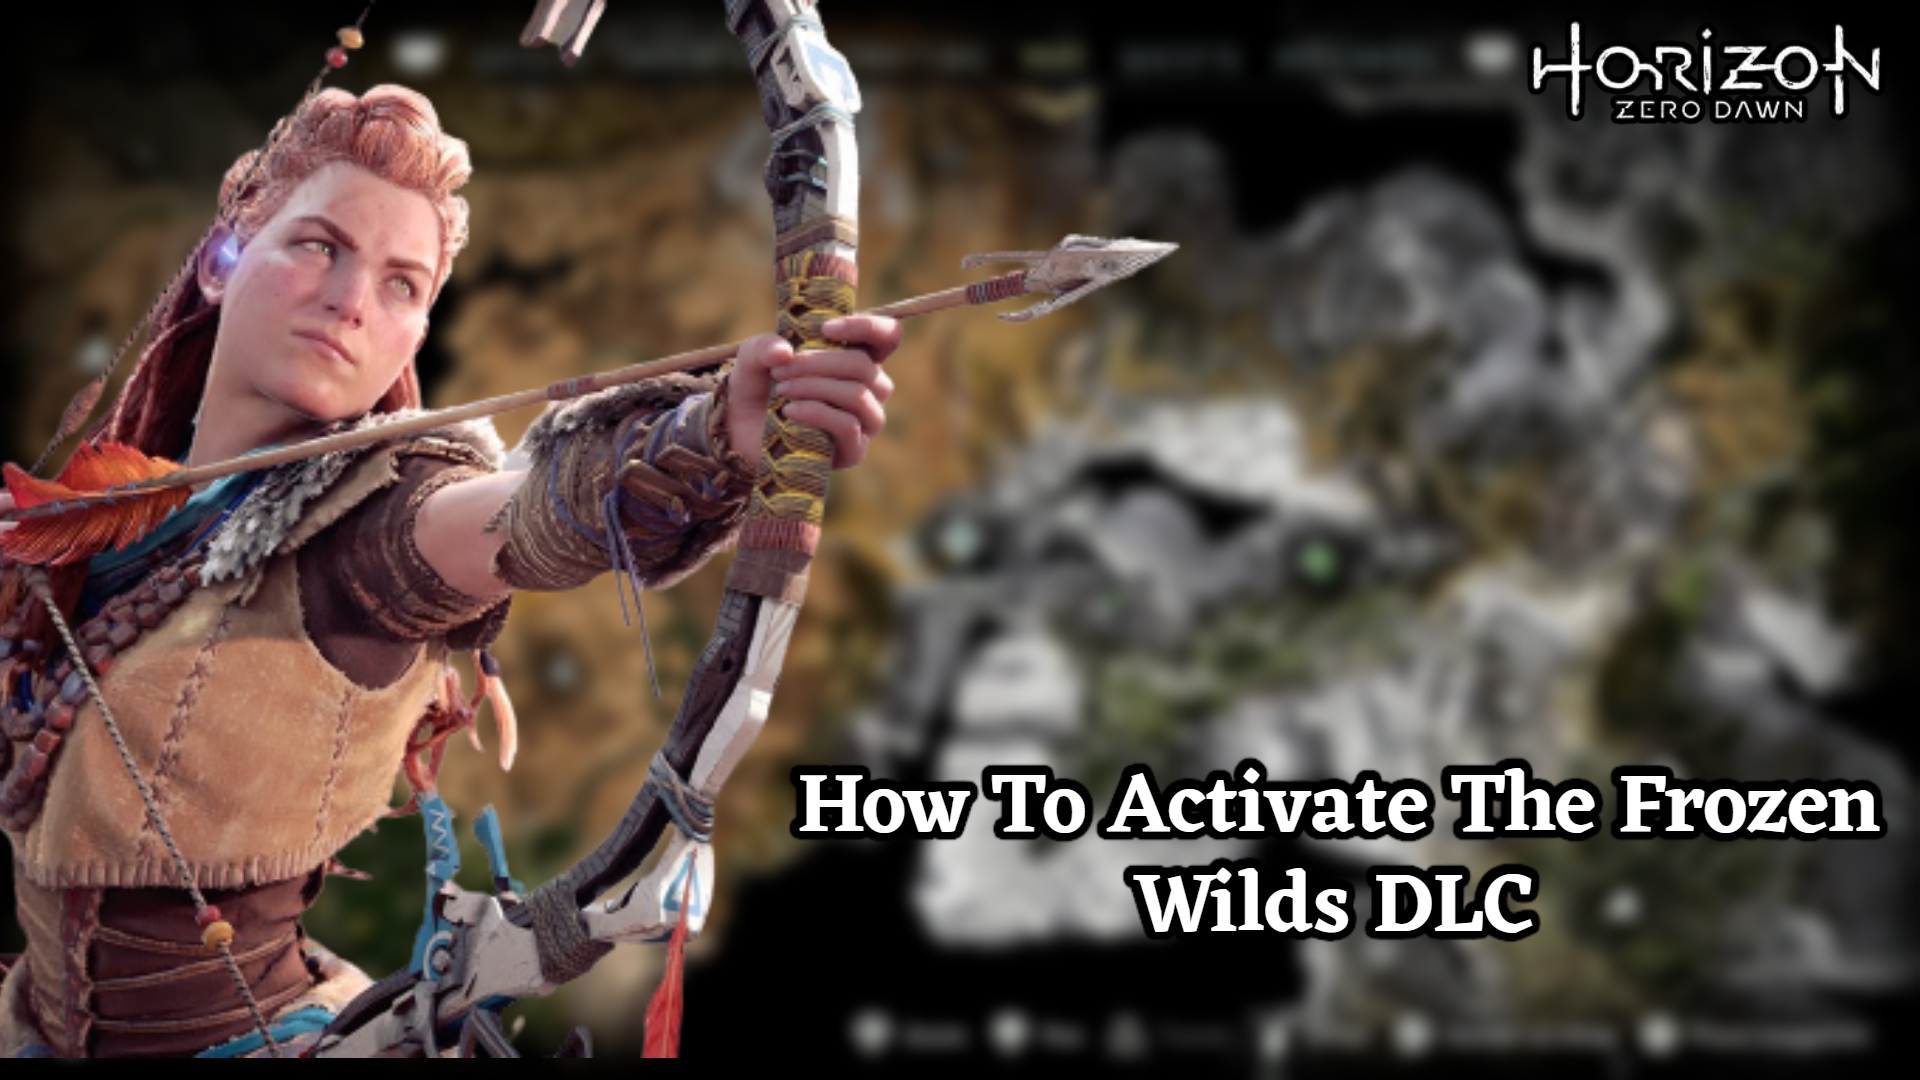 You are currently viewing How To Activate The Frozen Wilds DLC In Horizon Zero Dawn